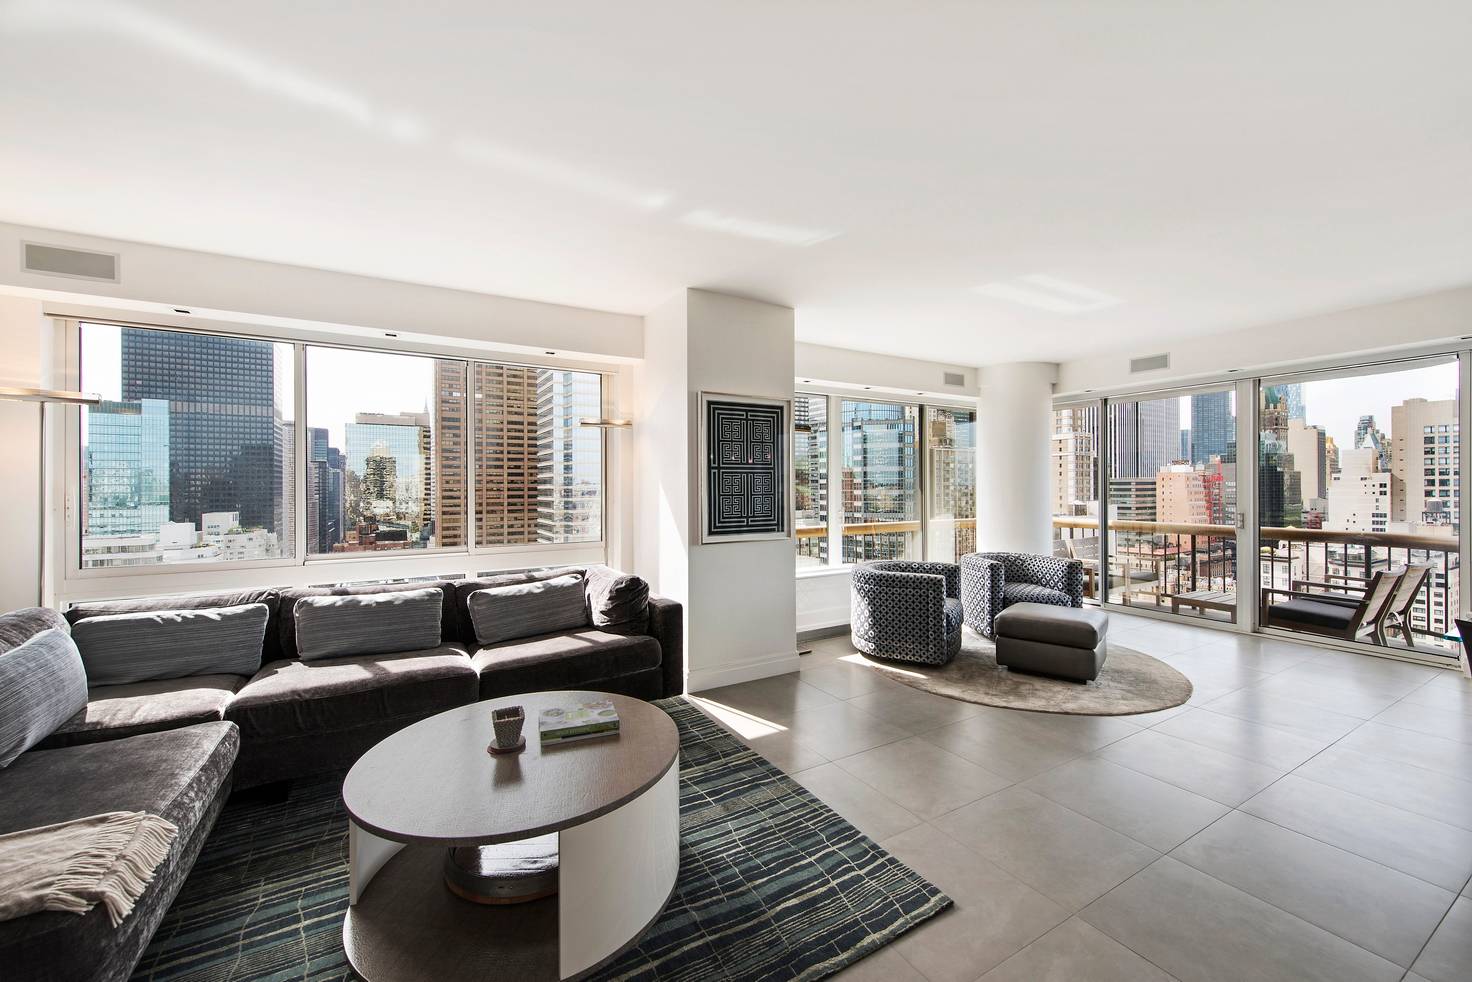 Central Park View: 4 Bedroom, 4.5 Bathroom with Den & Terraces at The Trump Plaza